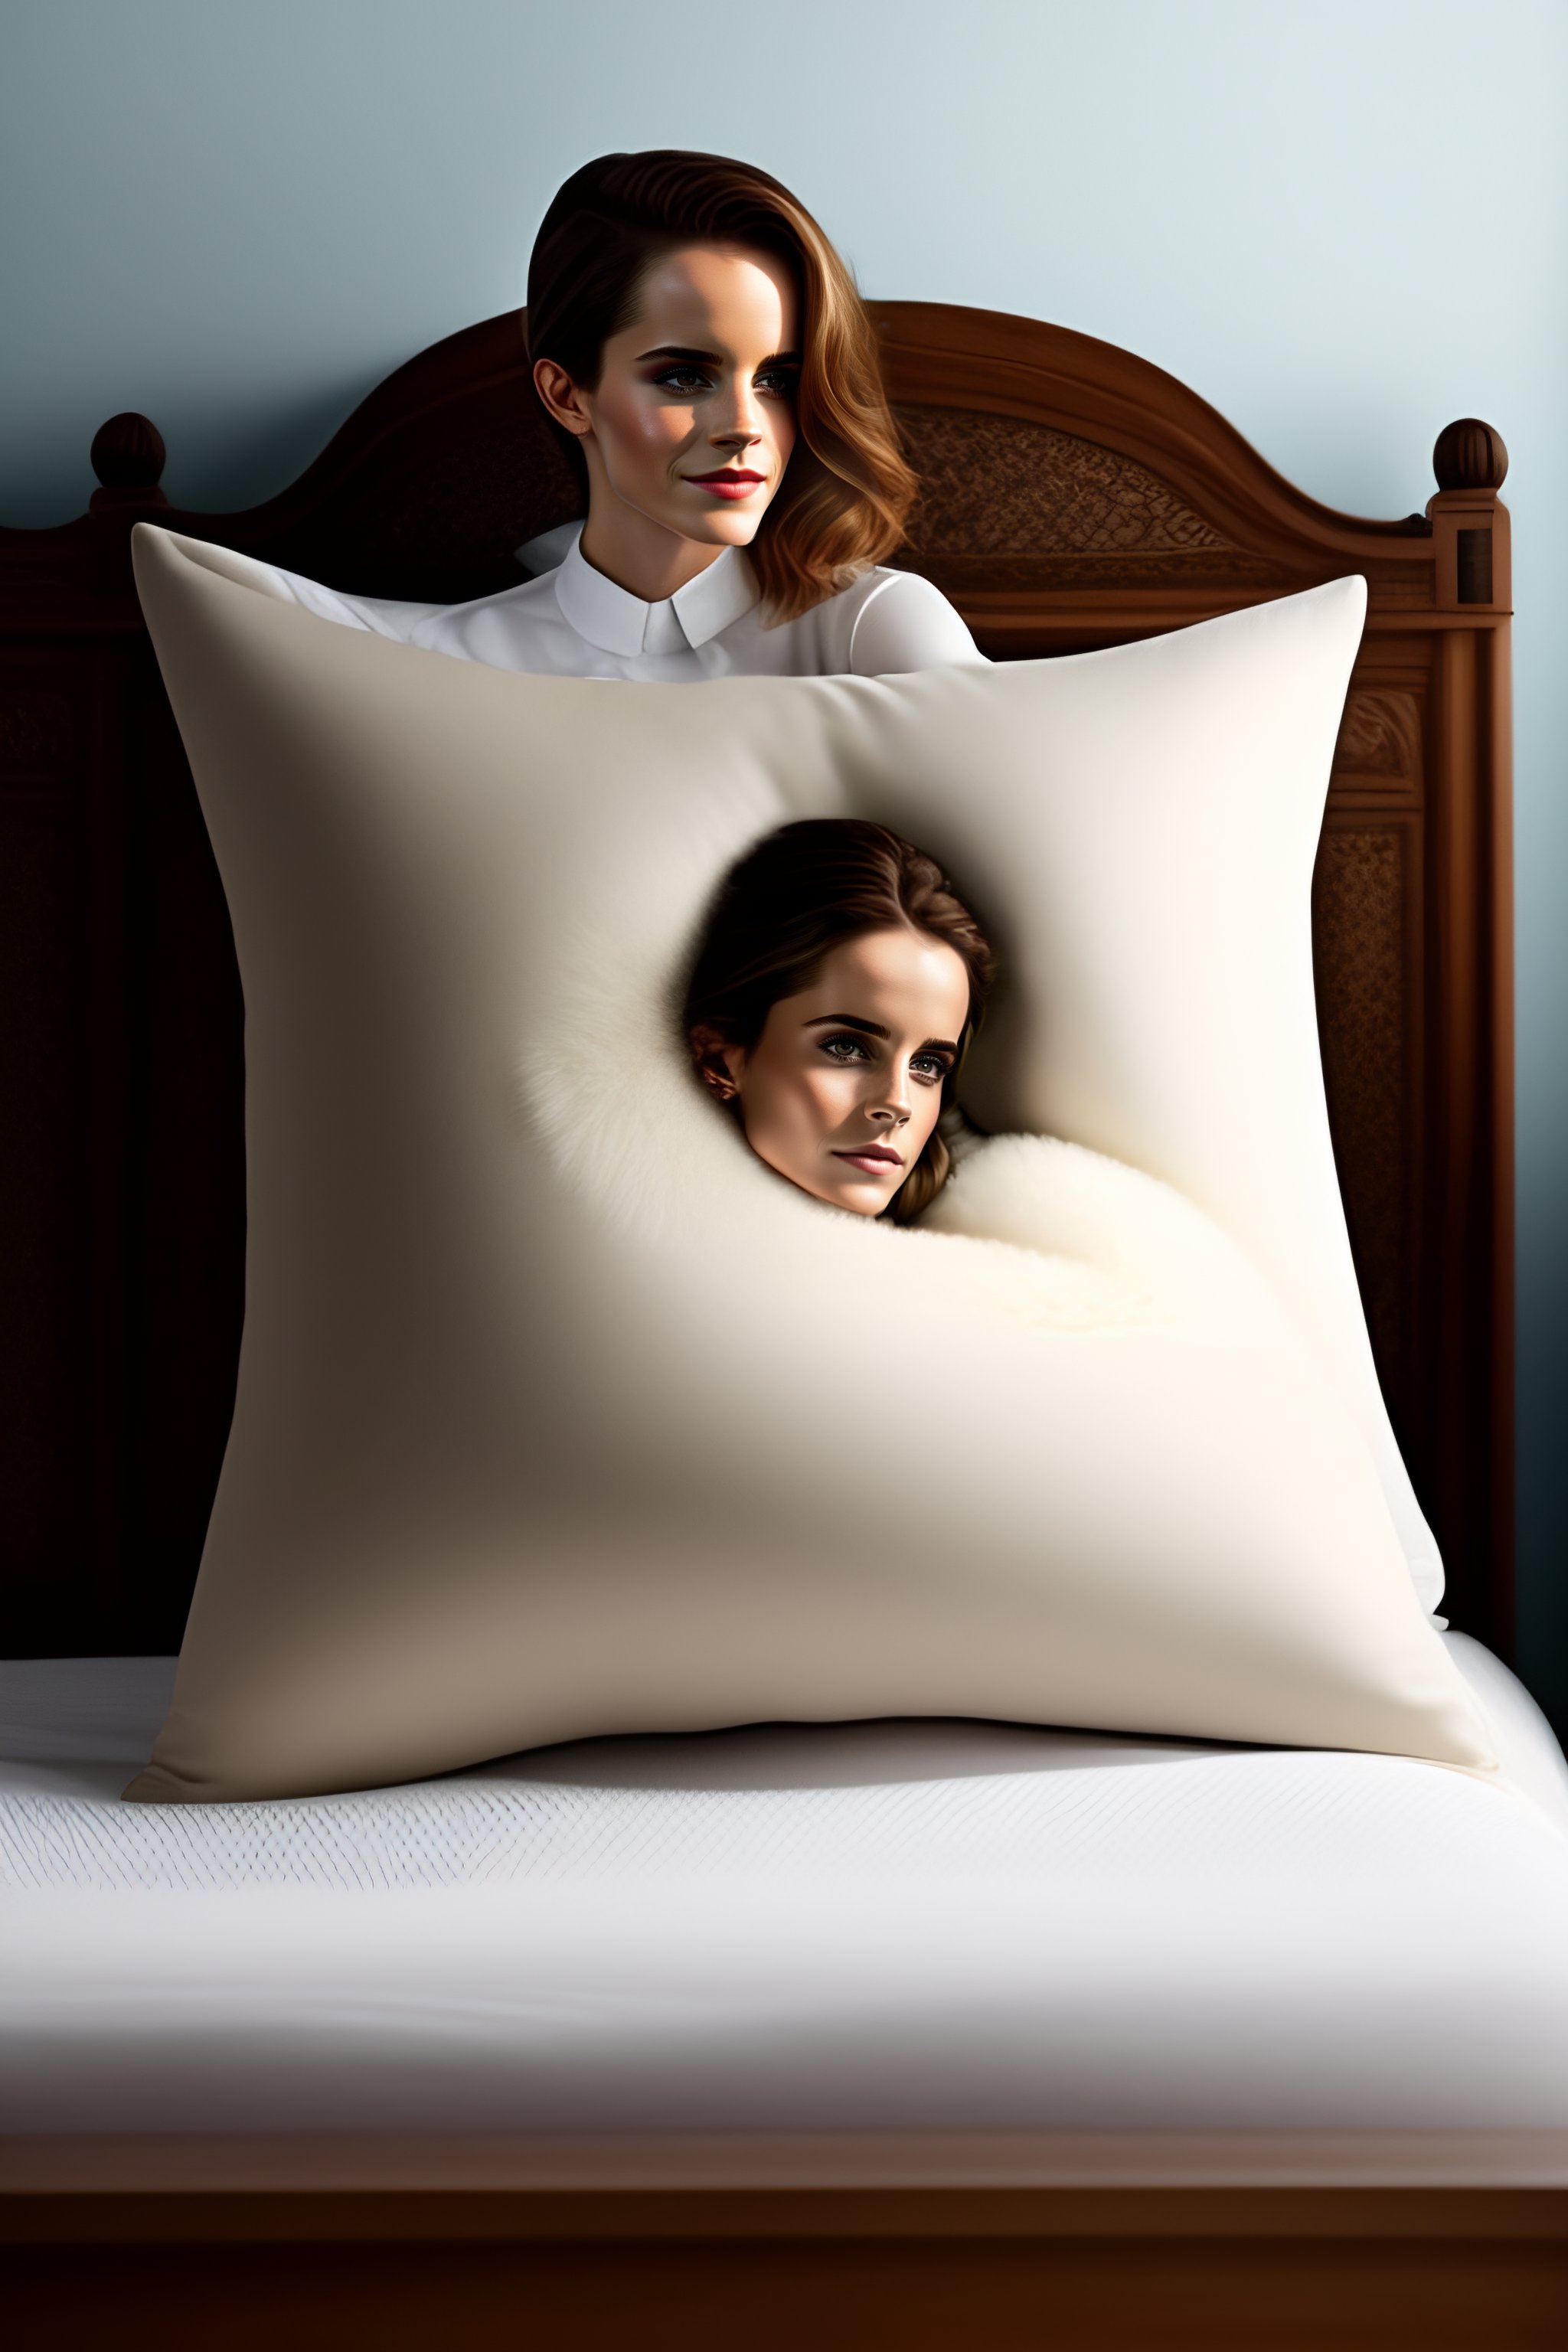 aayush upadhyay recommends how do you ride a pillow pic